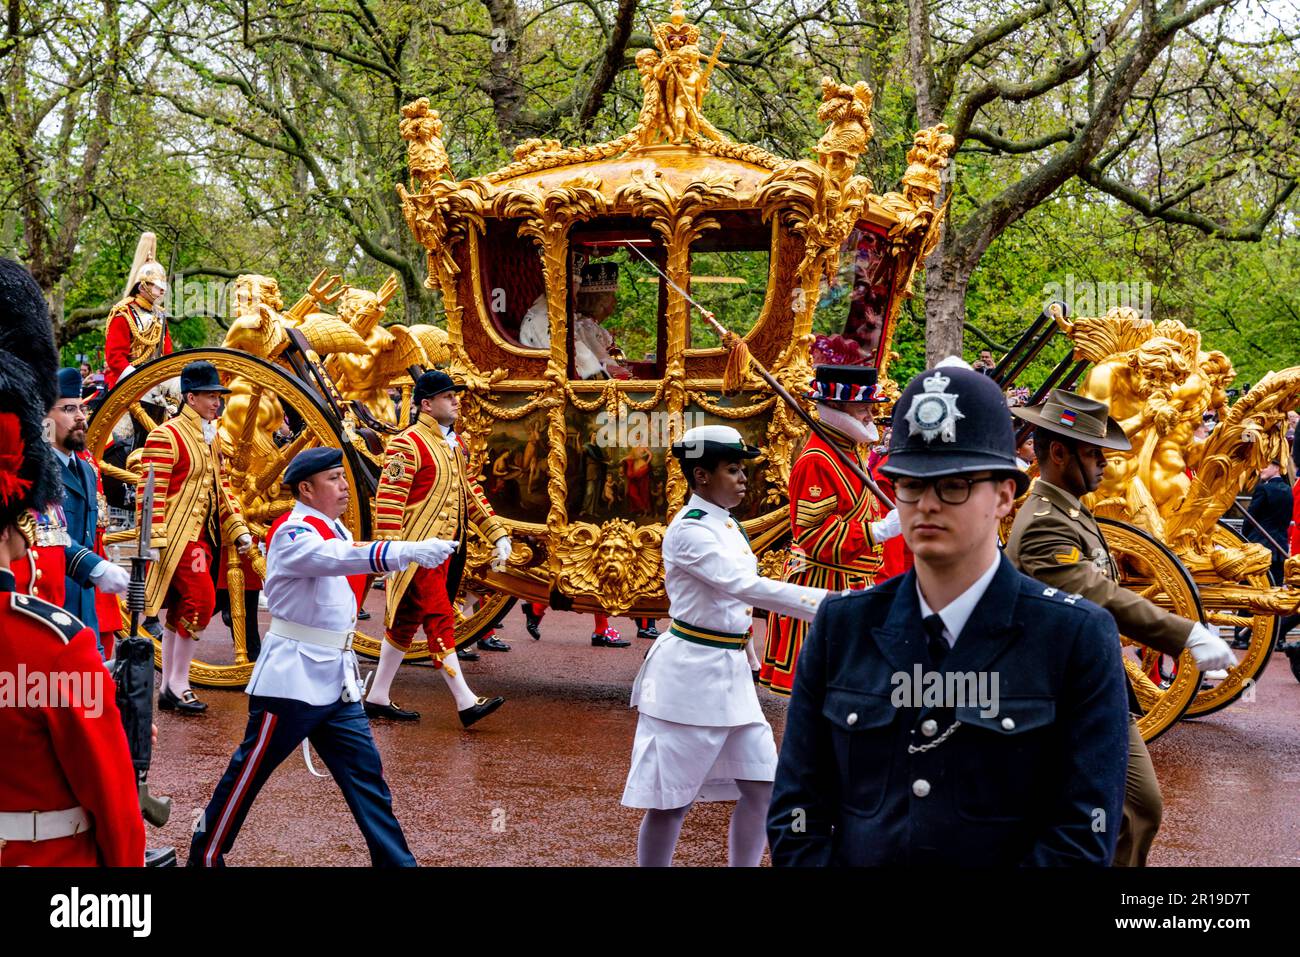 King Charles III and Queen Camilla Travel Back To Buckingham Palace In The Gold State Coach As Part Of The Coronation Procession, London, UK. Stock Photo